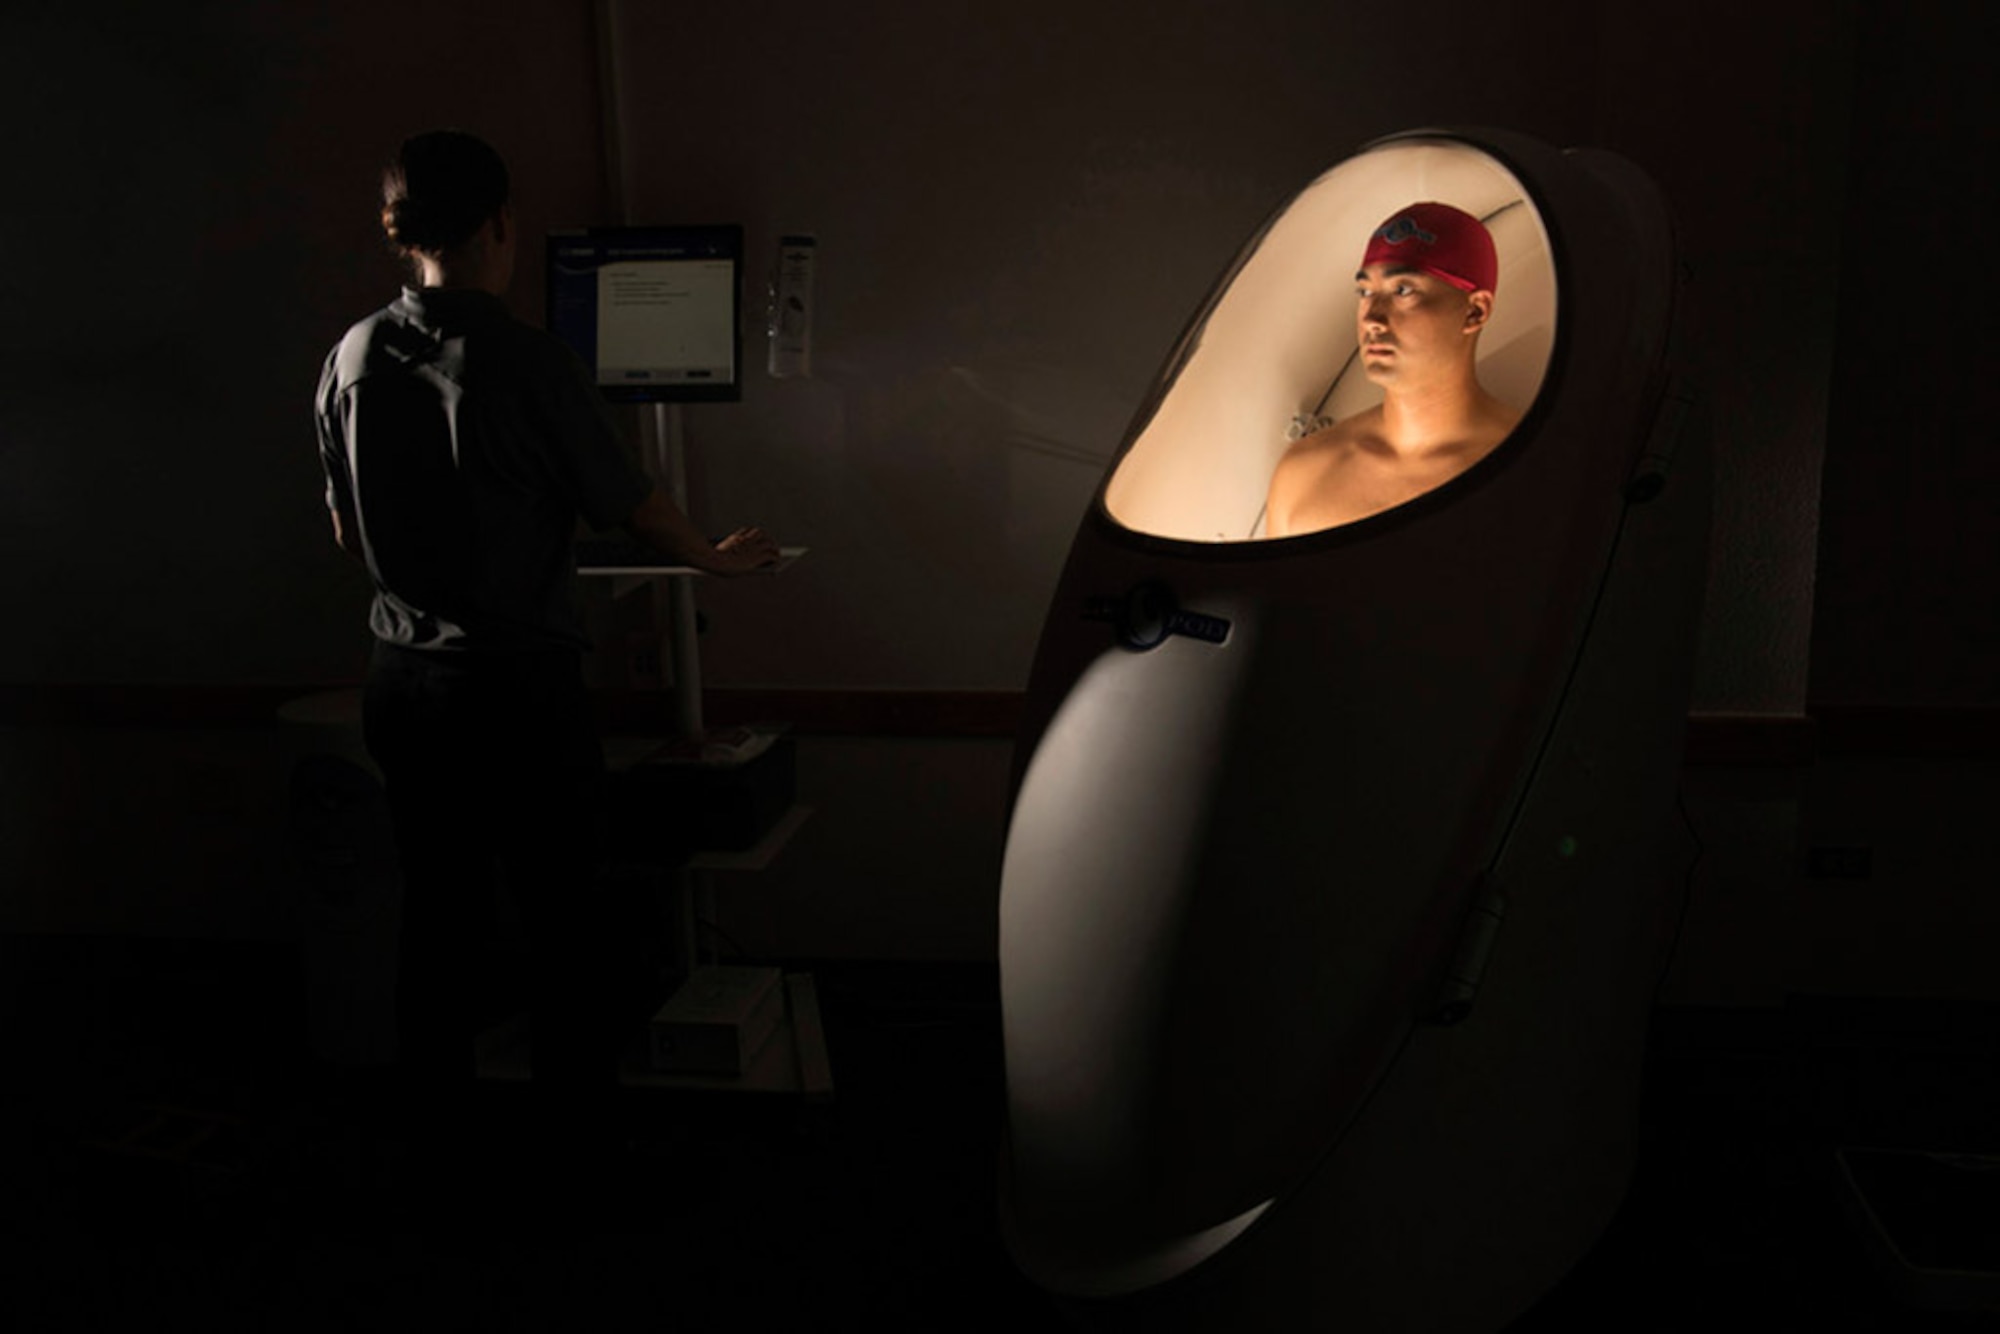 Air Force Staff Sgt. Robert Jette undergoes a body composition measurement test at the 350th Battlefield Airman Training Squadron at Joint Base San Antonio-Lackland in San Antonio June 28. Jette is a Special Operations recruiter based in Fresno, California